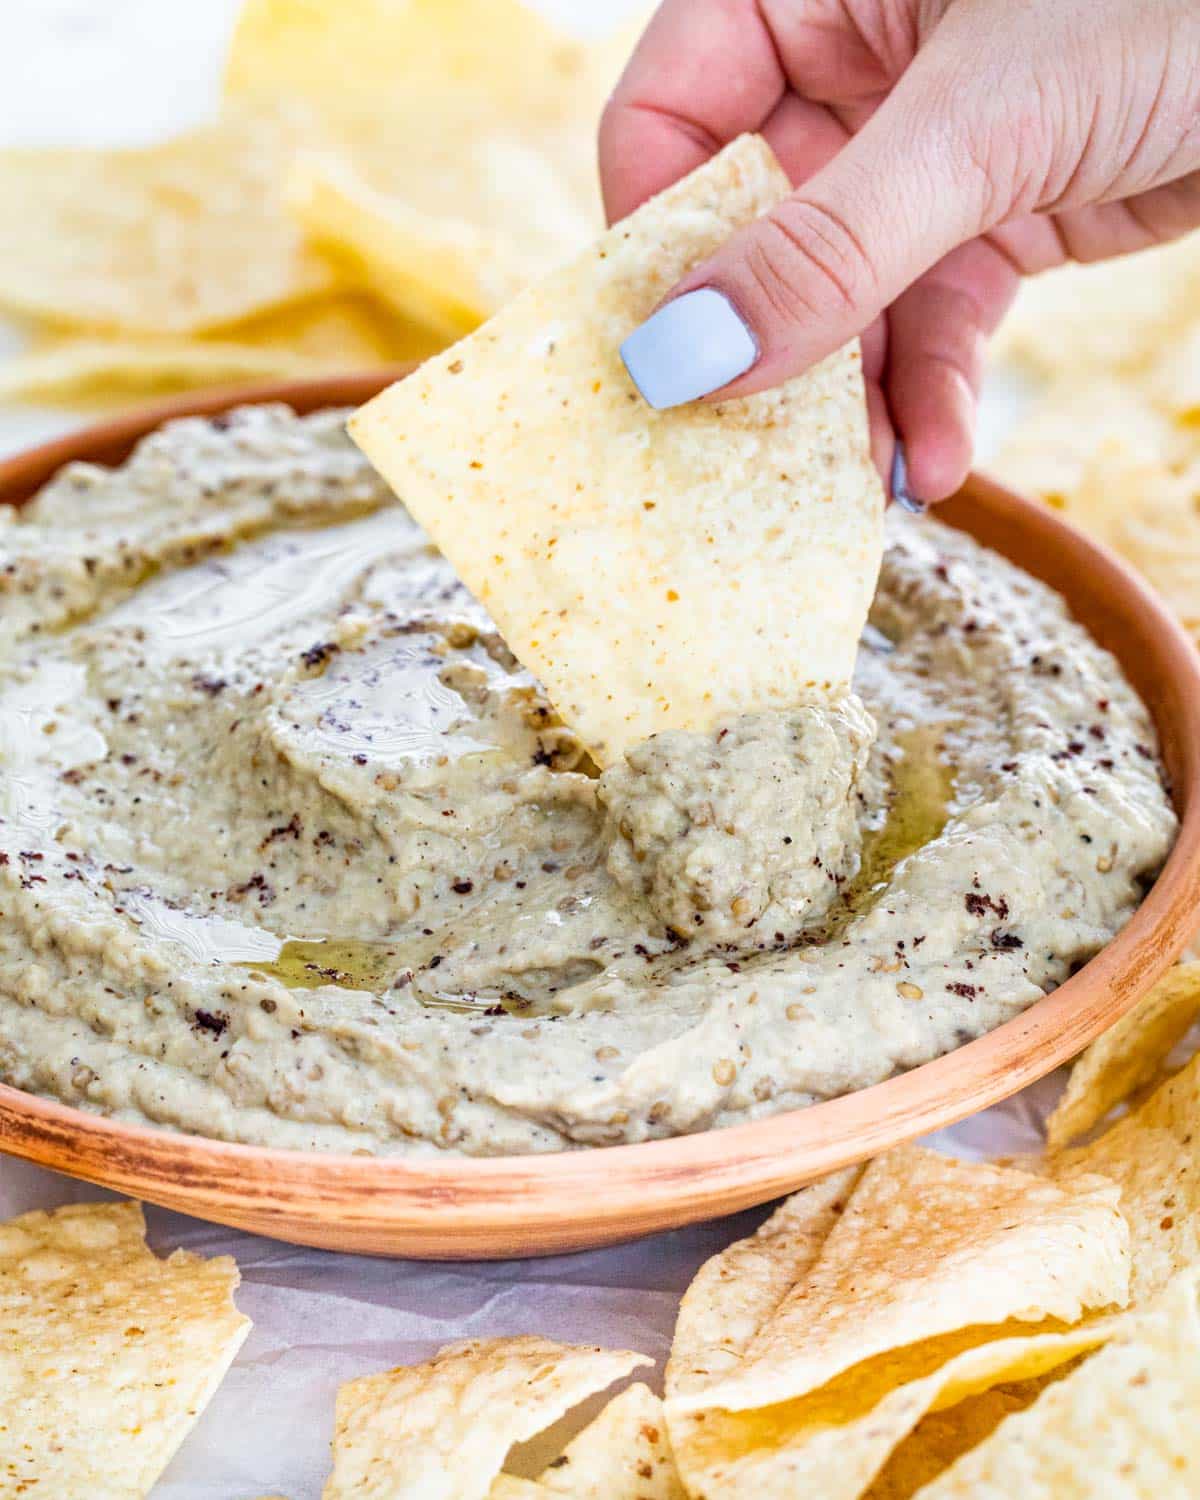 a hand dipping a chip in a bowl full of baba ganoush.